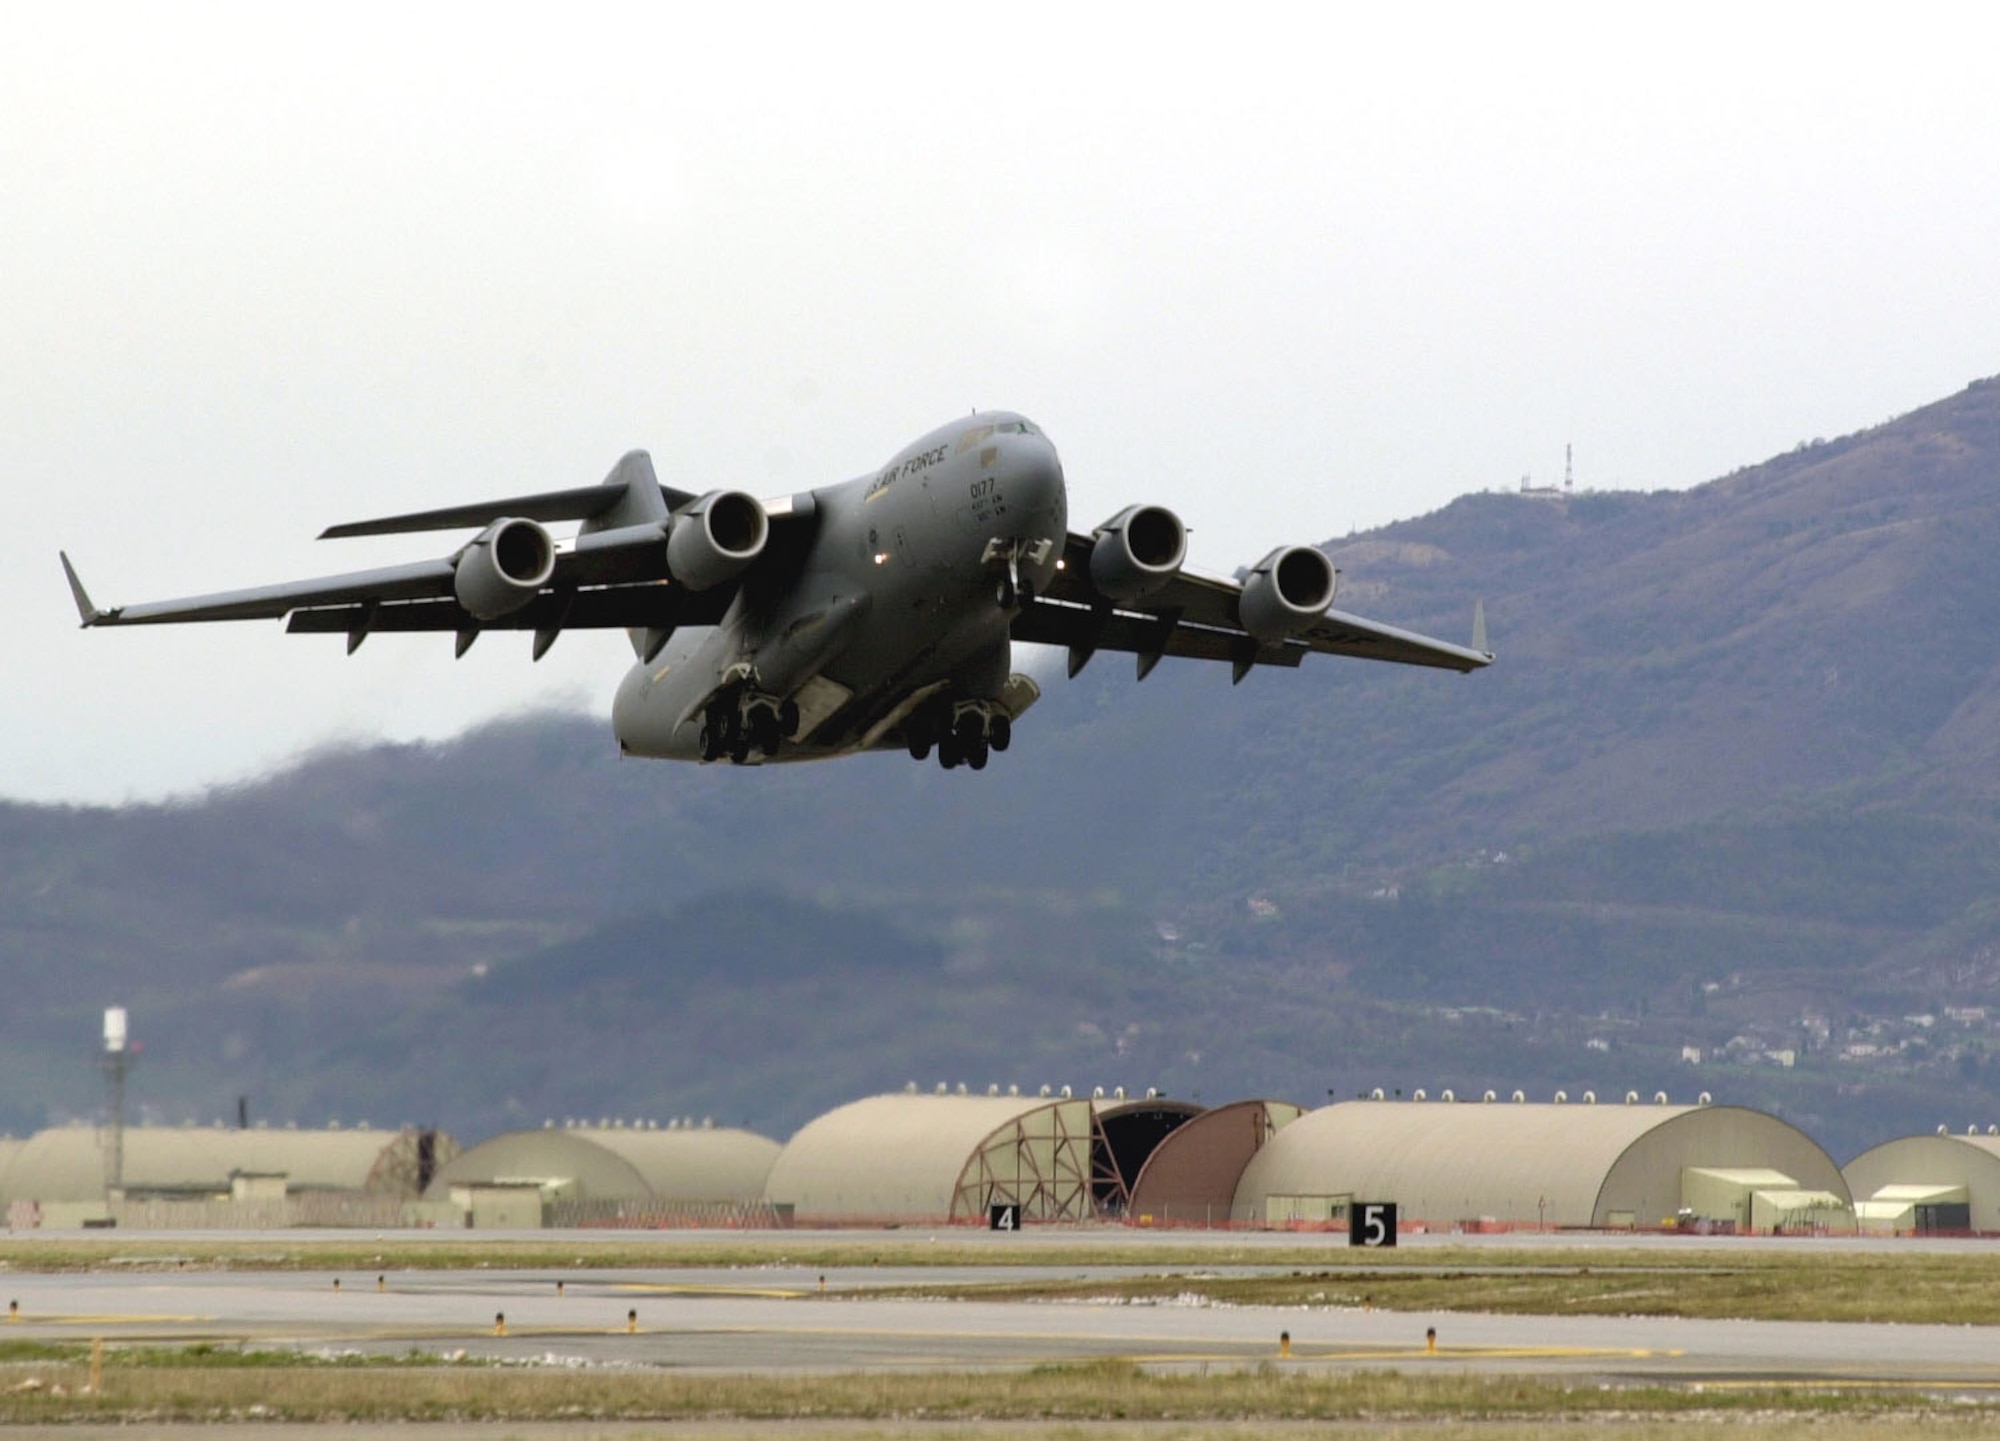 C-17 Globemaster III aircraft similar to the one in the photo are delivering aid and equipment to Cyprus for Americans who have left Lebanon.  (U.S. Air Force photo/Staff Sgt. Mitch Fuqua)